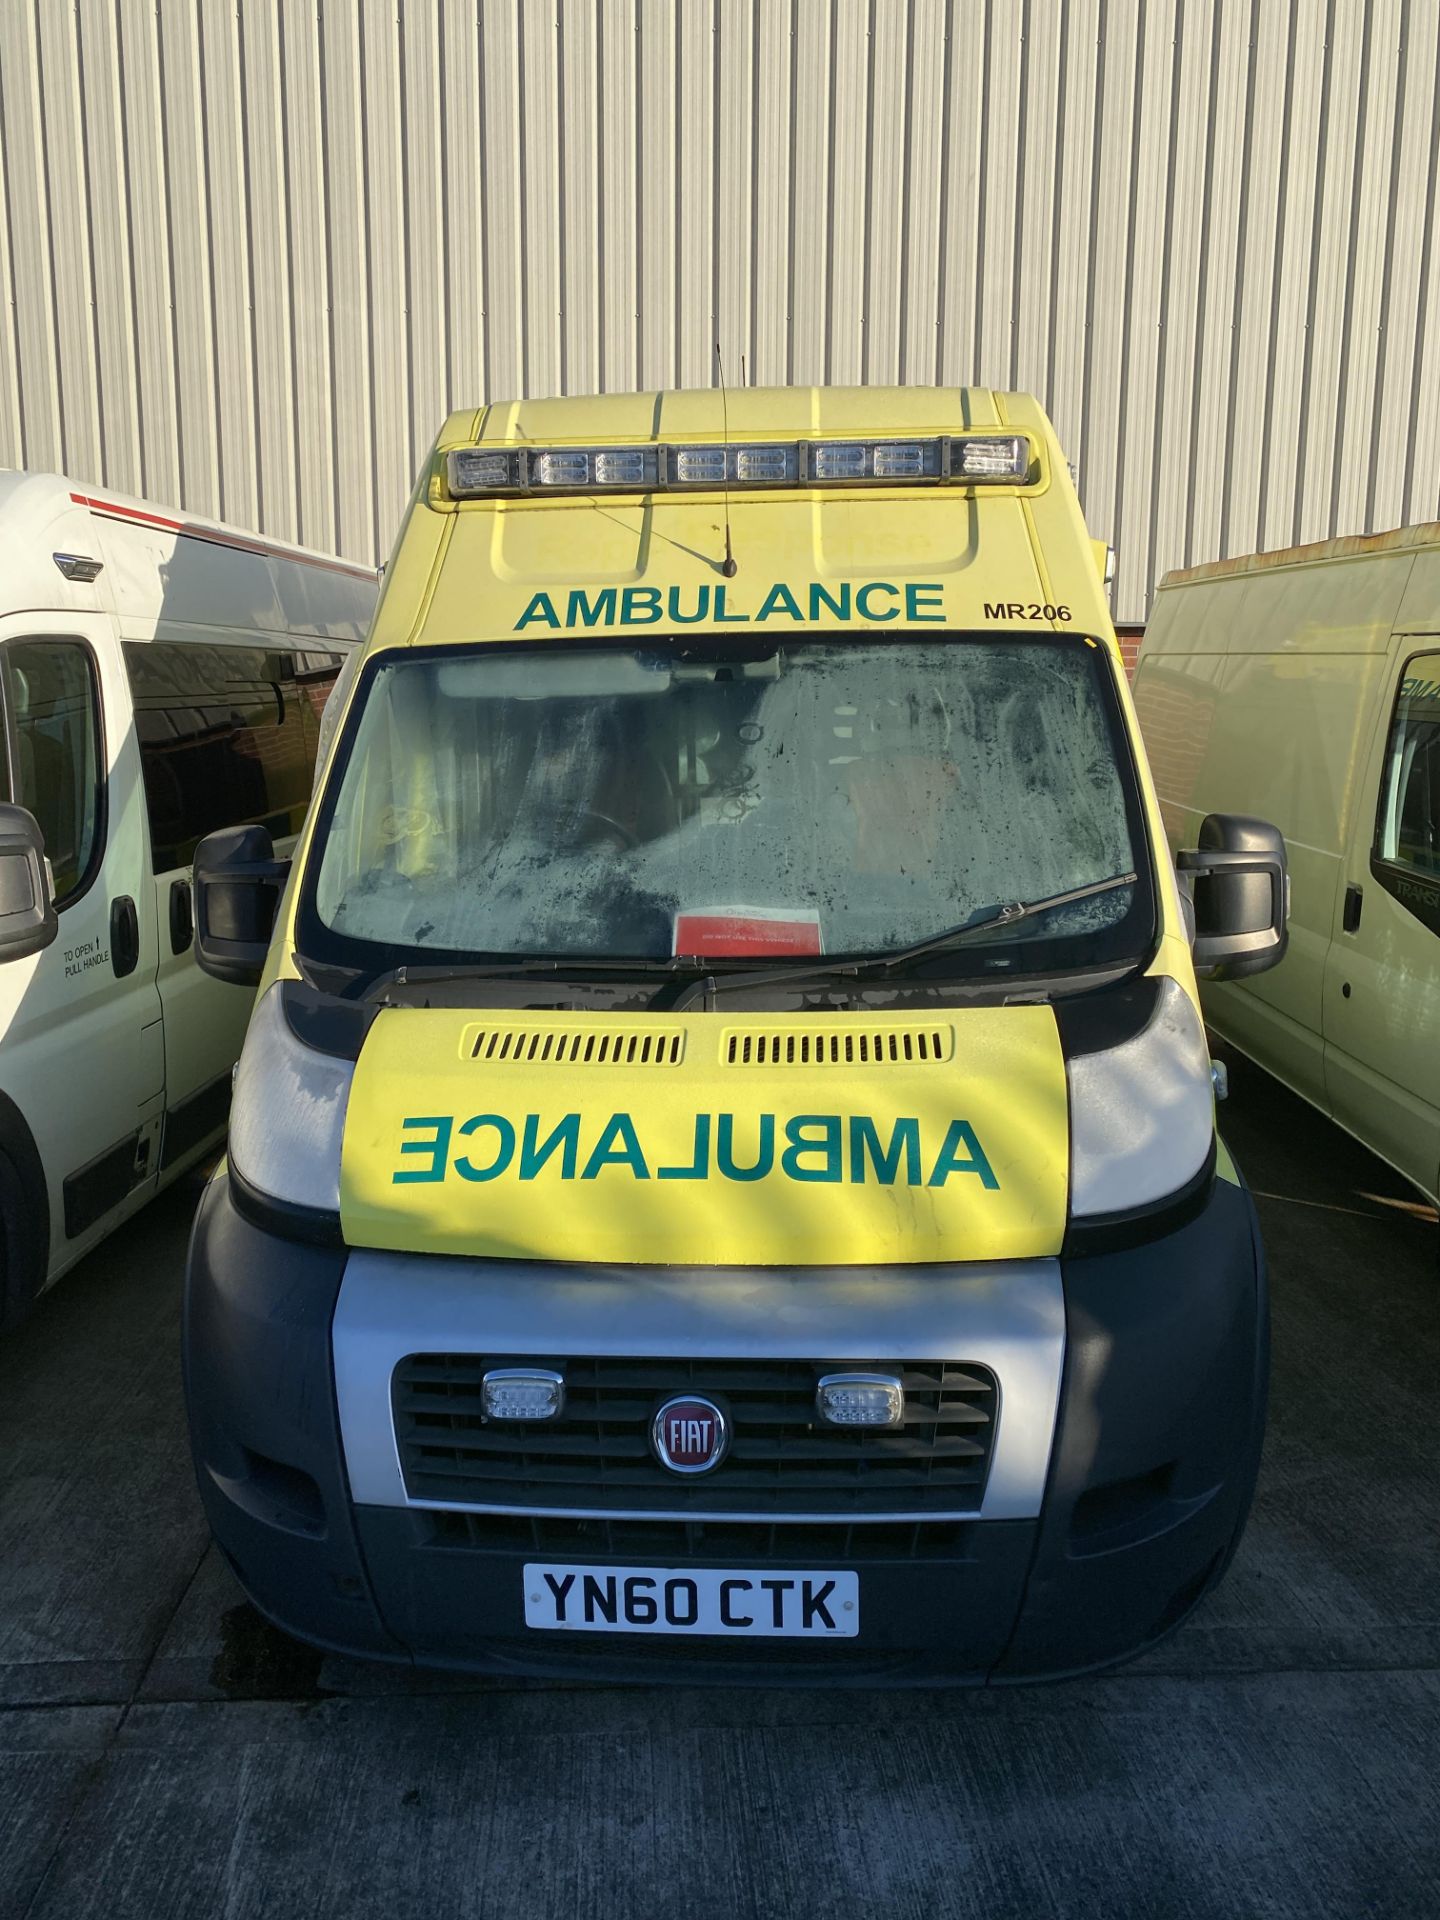 FIAT DUCATO 40 MAXI 160 M-JET VAN LIVERIED UP AS AN AMBULANCE - Diesel - Yellow. - Image 10 of 23